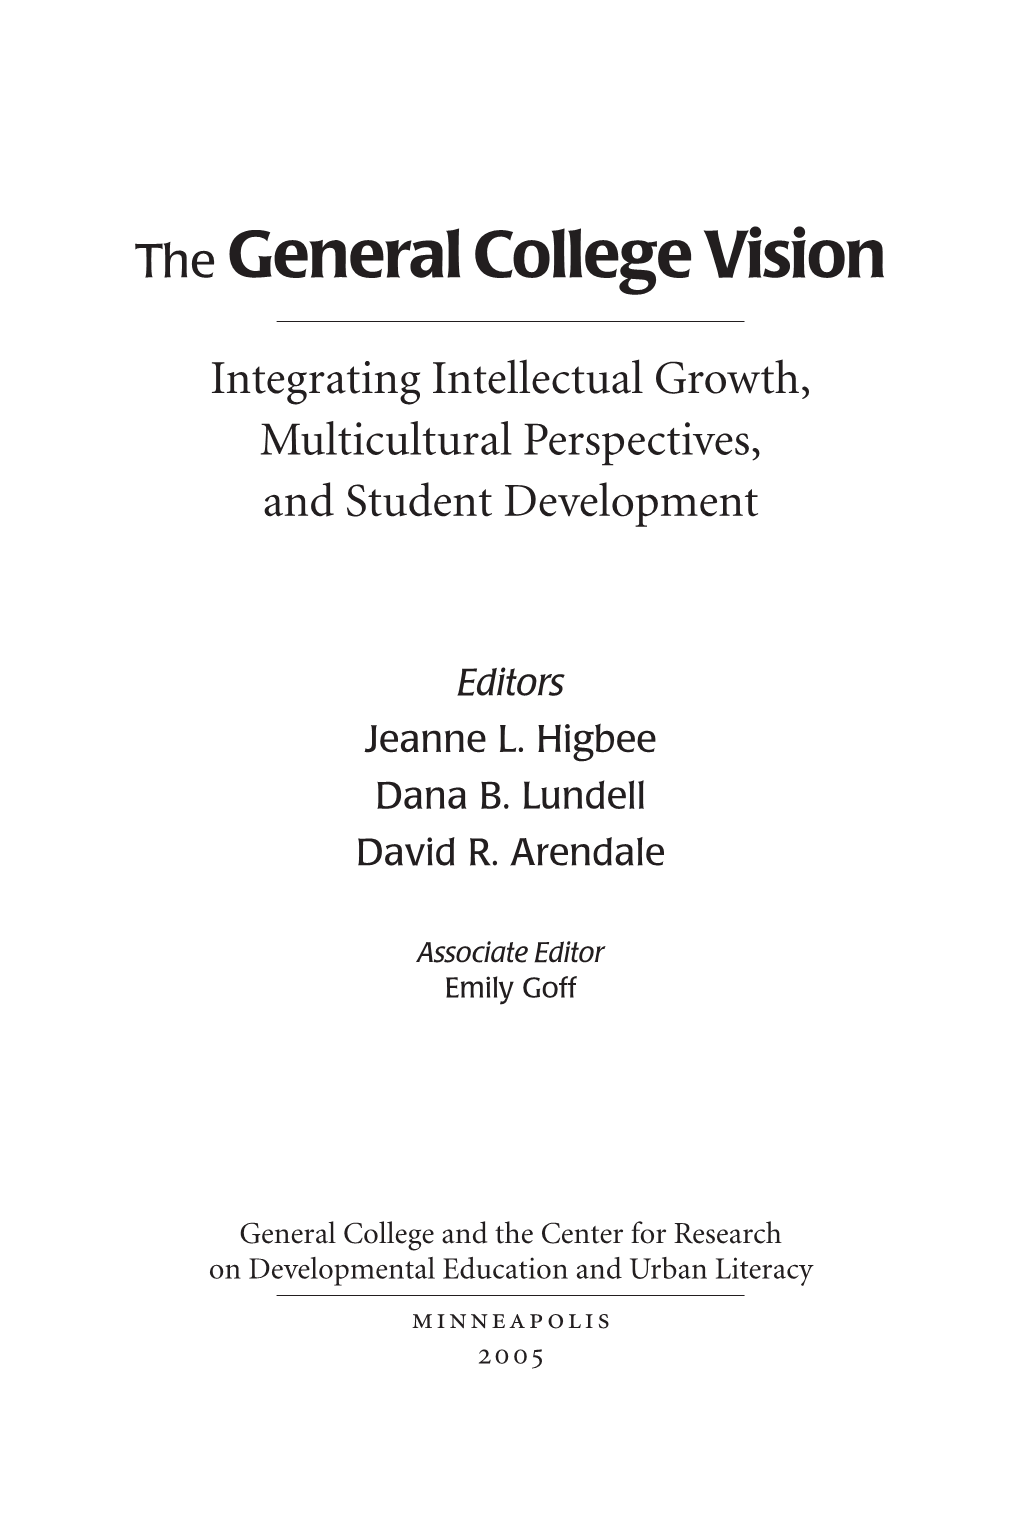 The General College Vision